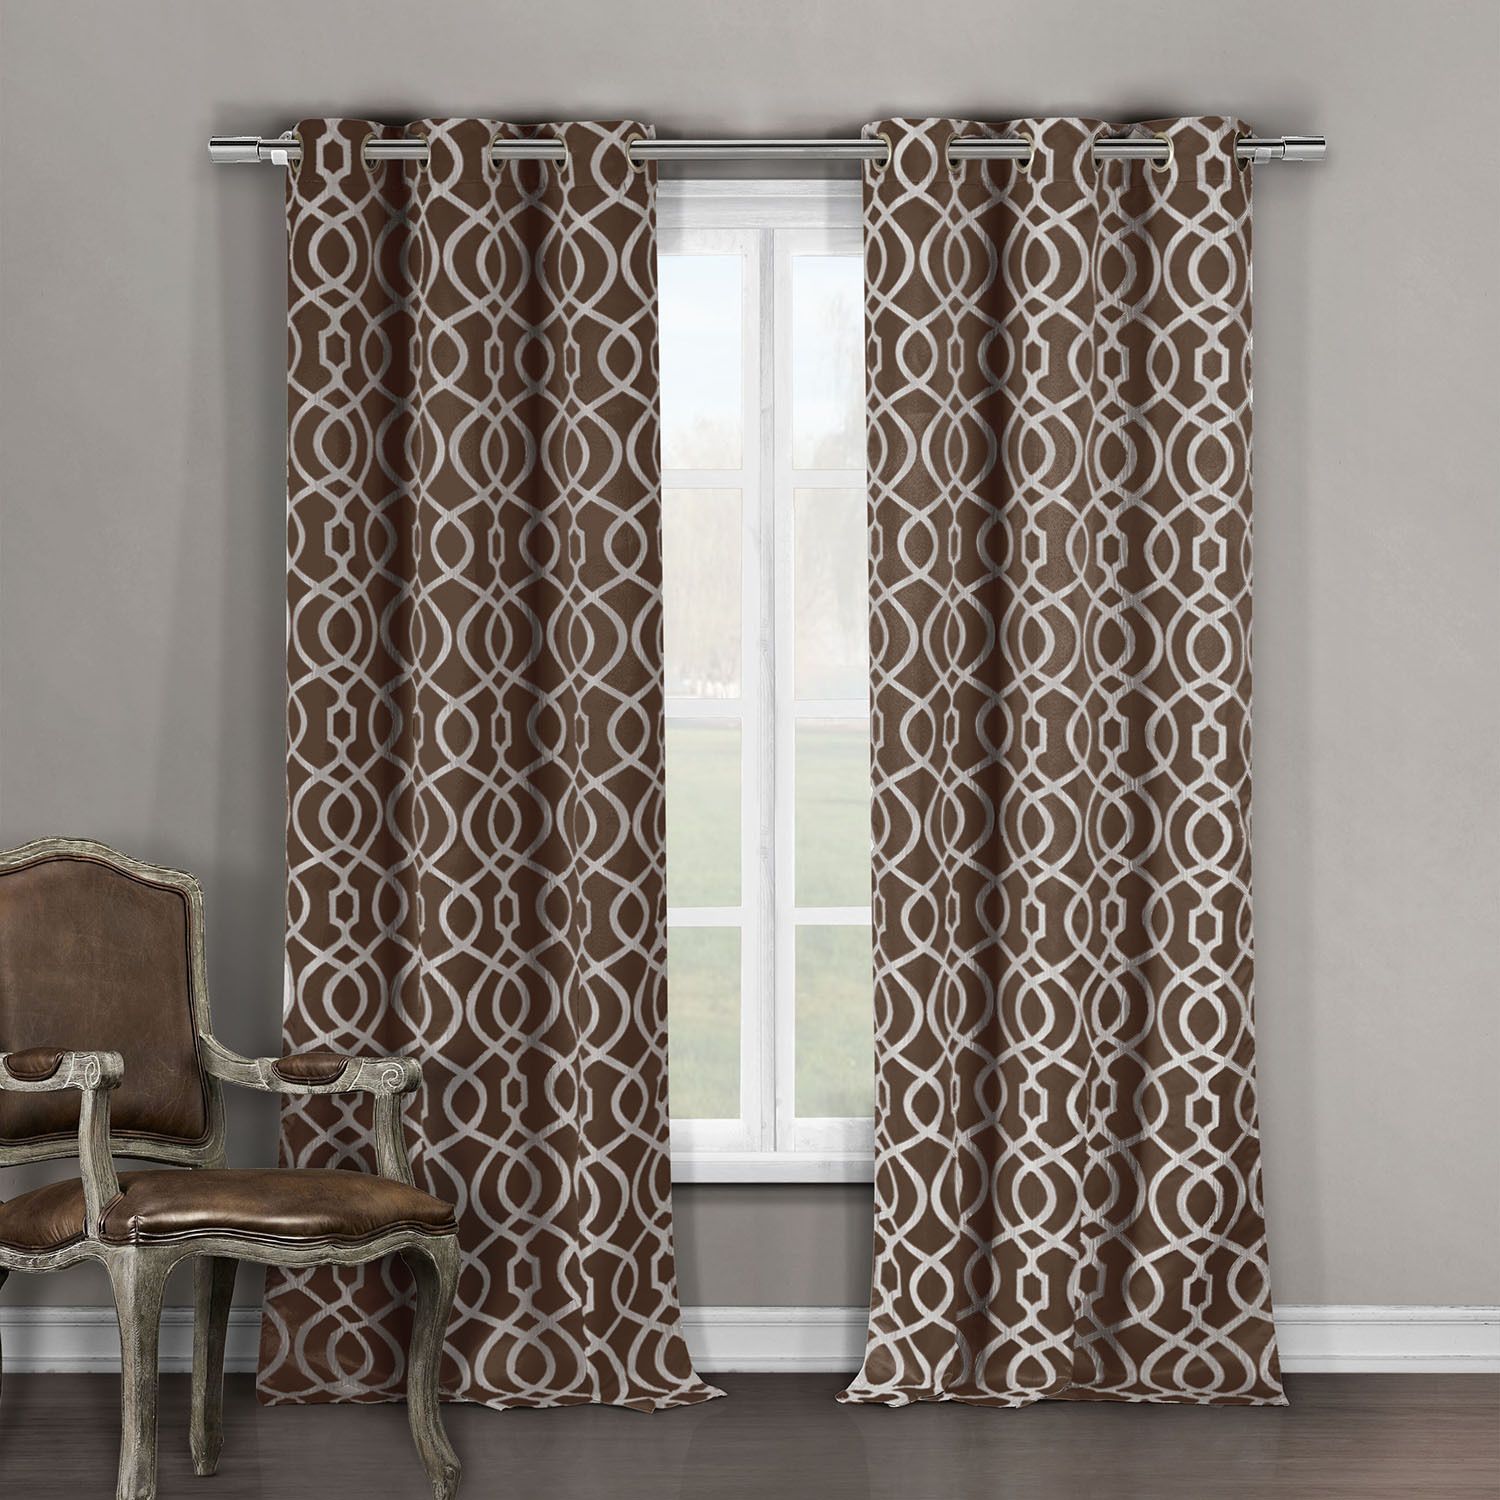 Image for Duck River Textile Harris Printed Blackout Window Curtain Set at Kohl's.